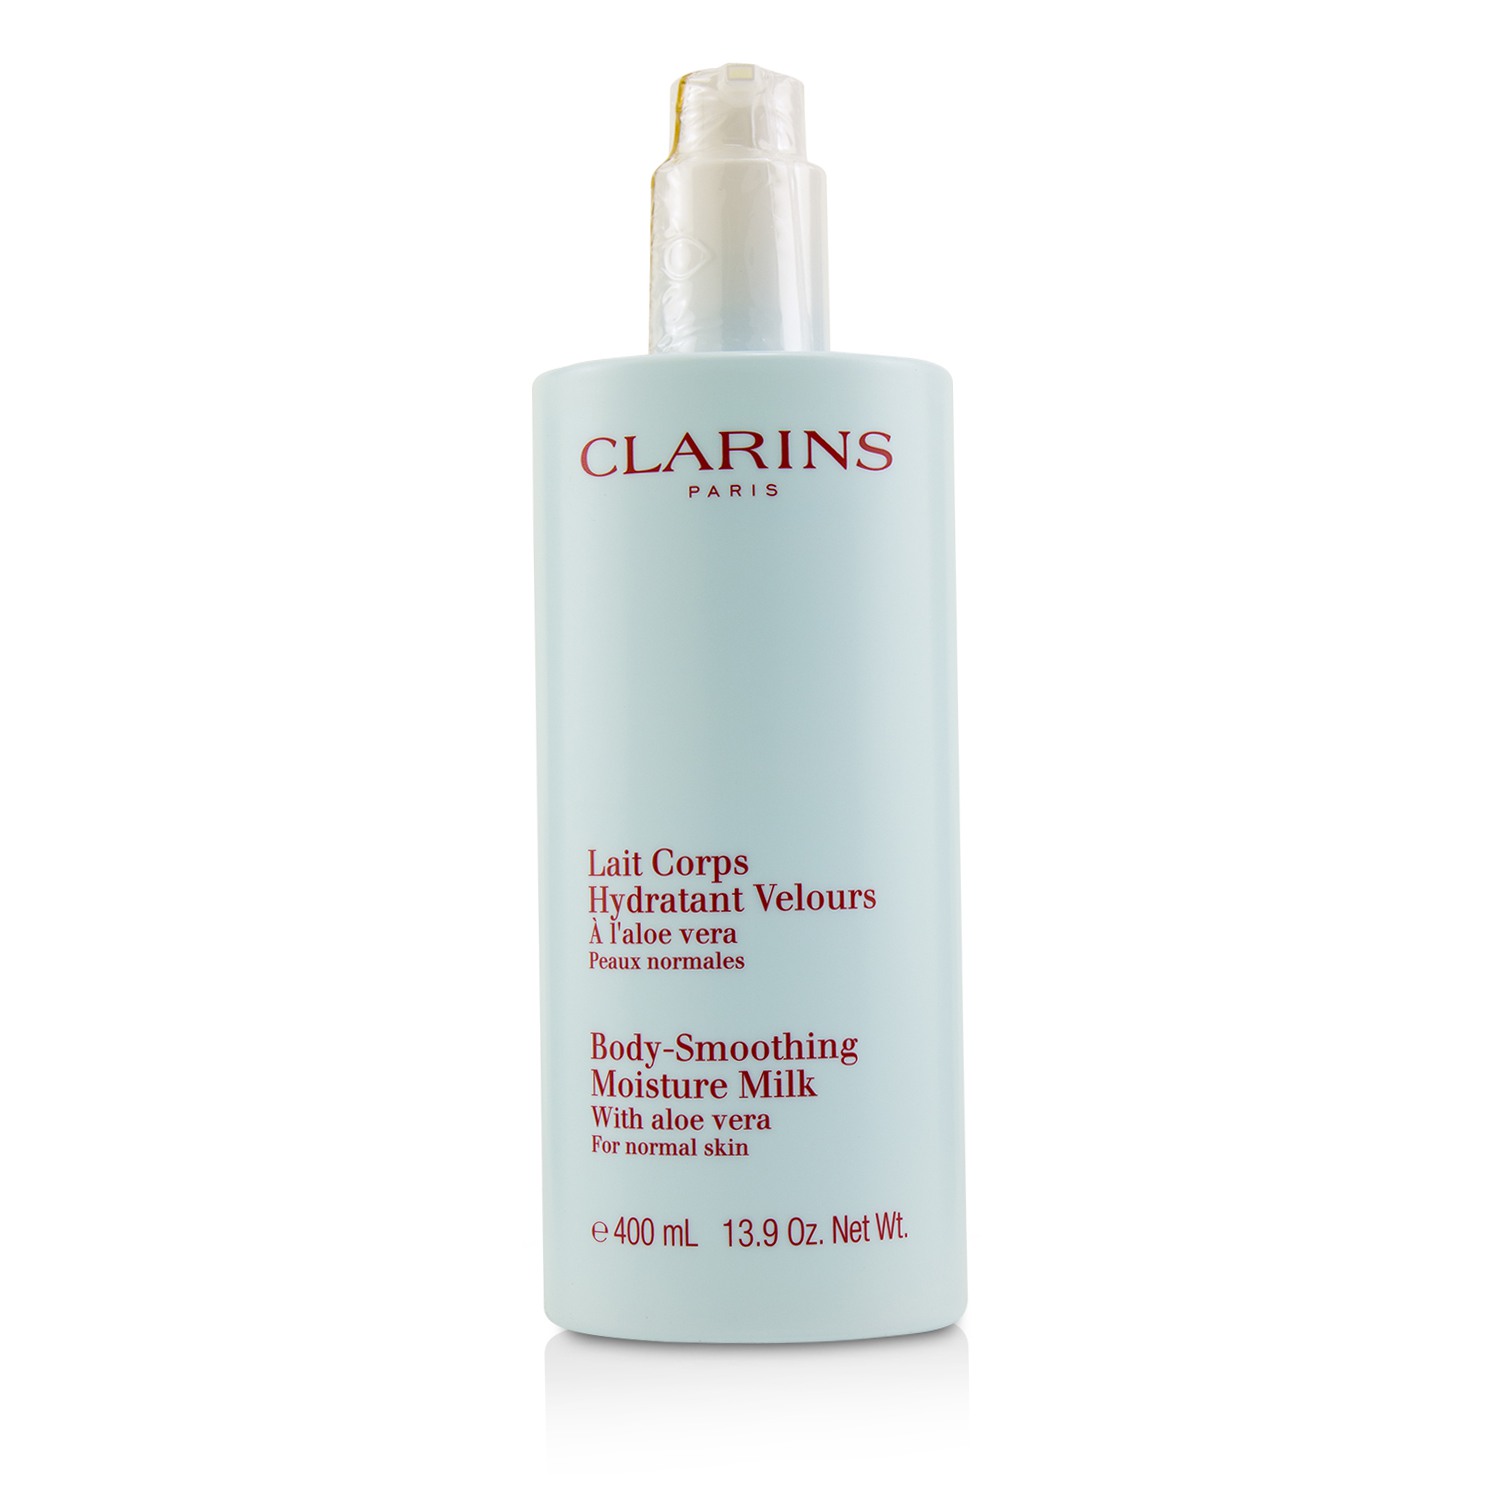 Body-Smoothing Moisture Milk With Aloe Vera - For Normal Skin Clarins Image